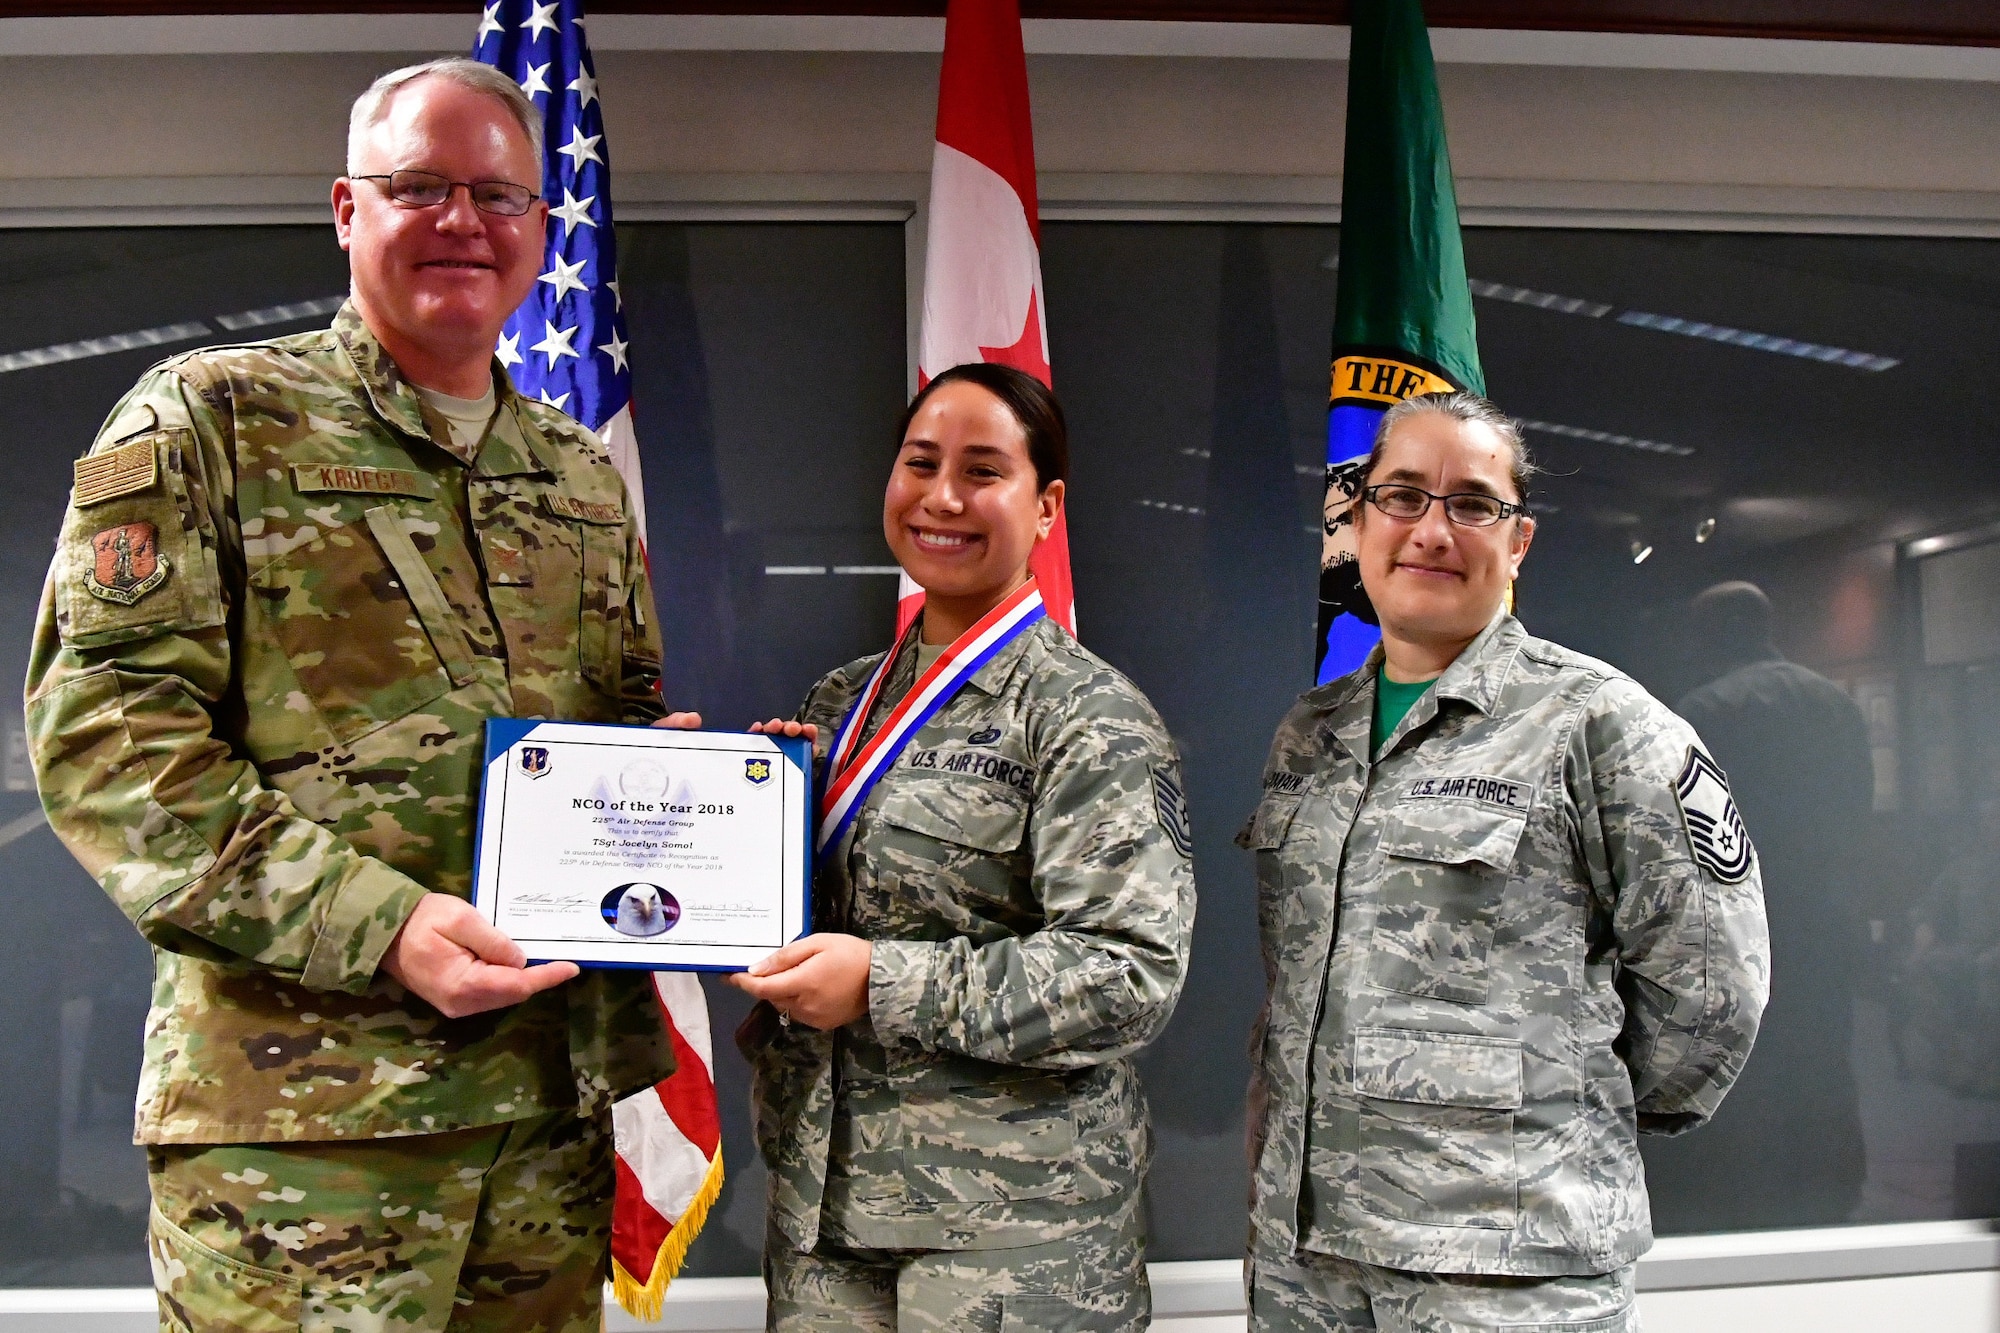 Tech. Sgt. Jocelyn Somol, 225th Air Defense Group human resource specialist is named the 225th ADG NCO of the Year Dec. 1, 2018 on Joint Base Lewis-McChord.  Somol poses with Col. William Krueger (left), 225th ADG commander and Senior Master Sgt. Rebekah St. Romain, 225th ADG superintendent.  (U.S. Air National Guard photo by Maj. Kimberly D. Burke)